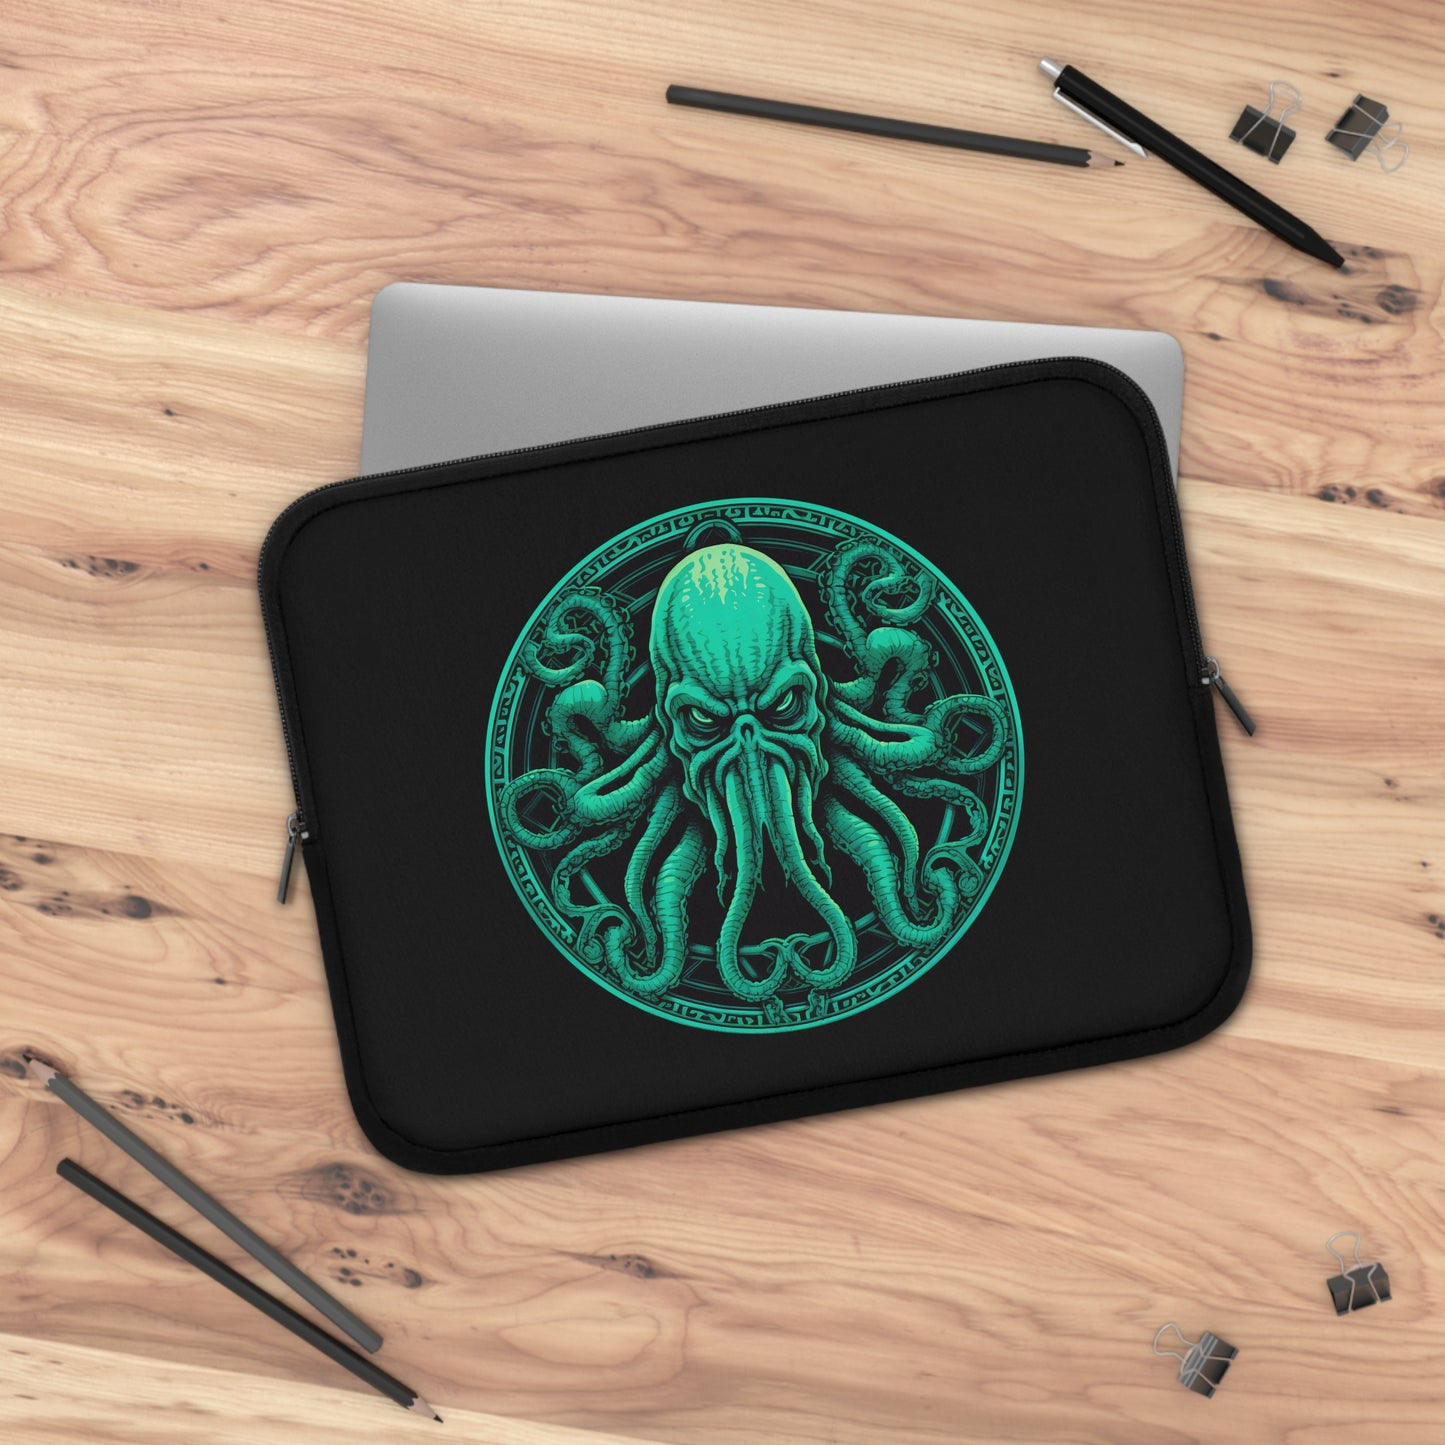 Cthulhu Laptop Sleeve, HP Lovecraft Tablet Sleeve, Mind Flayer Illithid iPad Cover, DnD MacBook Protective Case, Zipper Pouch, Laptop Bag